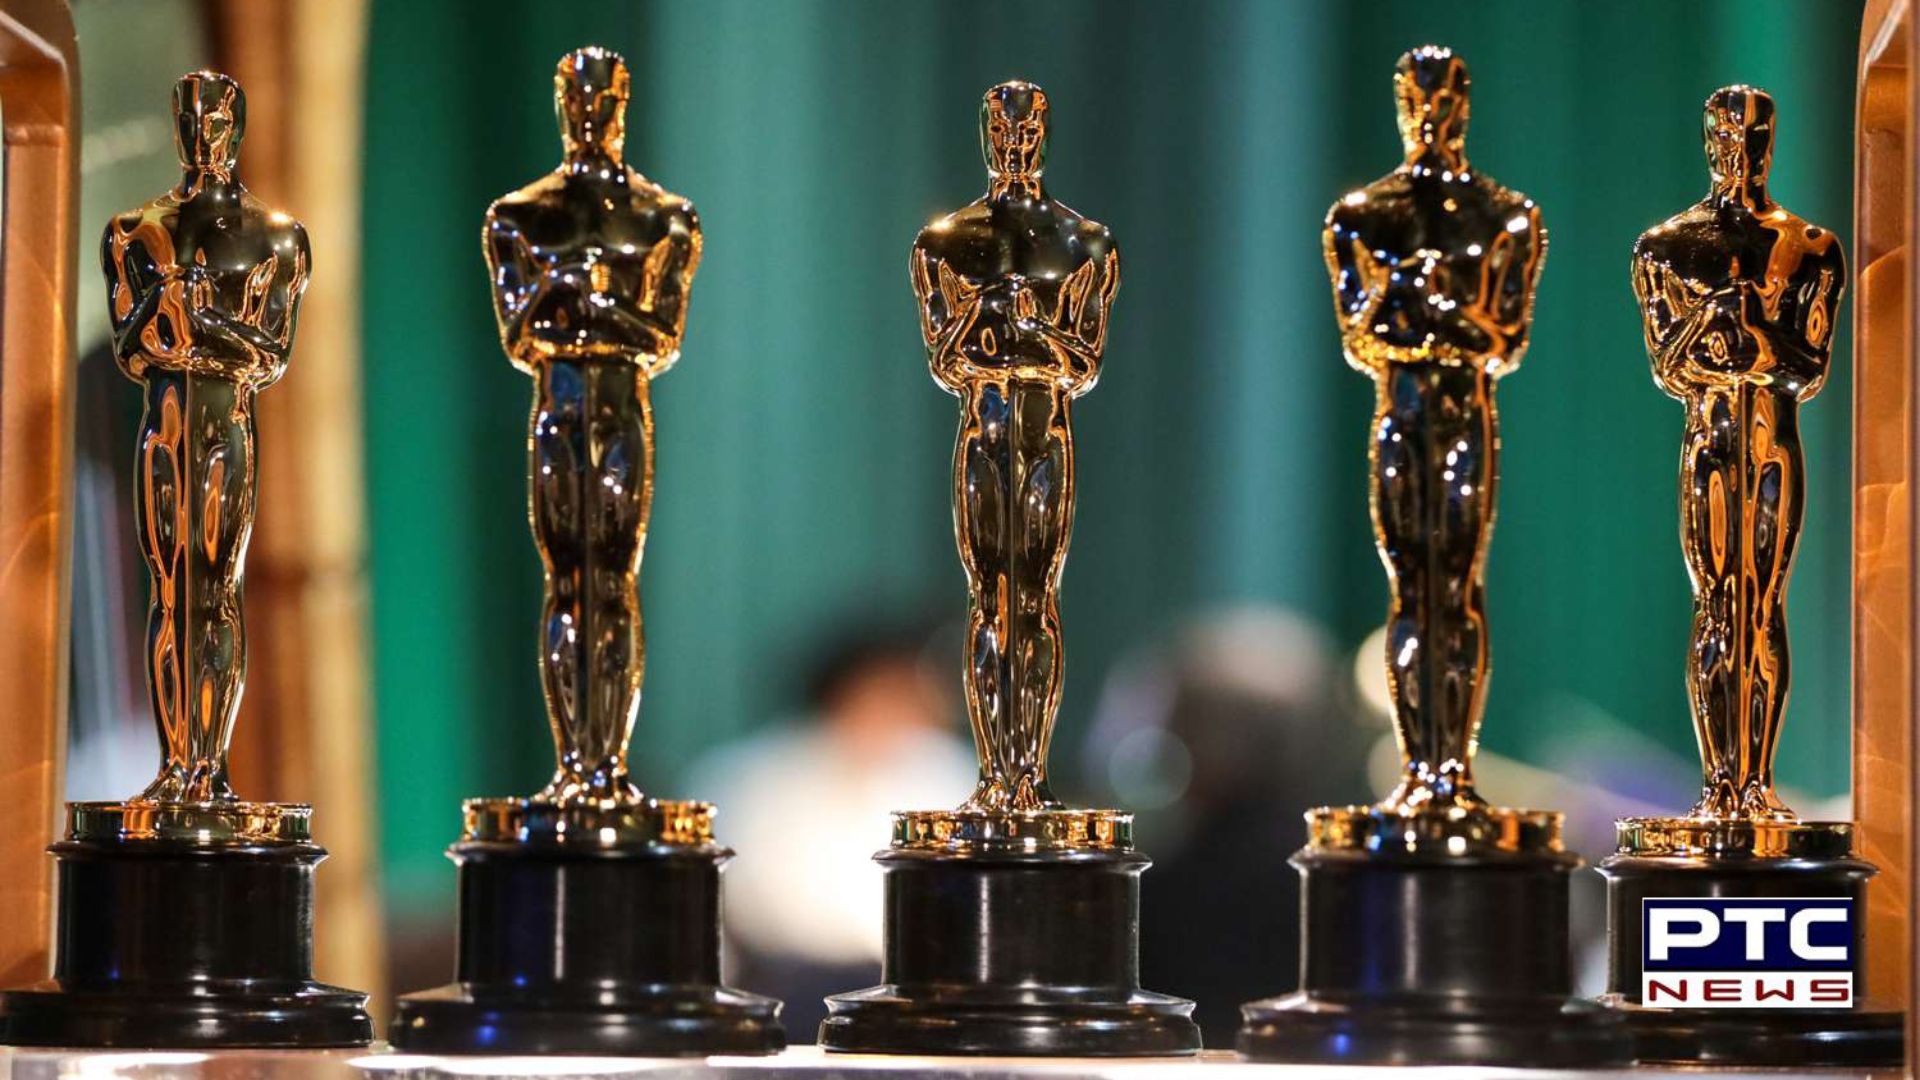 What's inside the Oscars 'everyone wins' goodie bags this year?